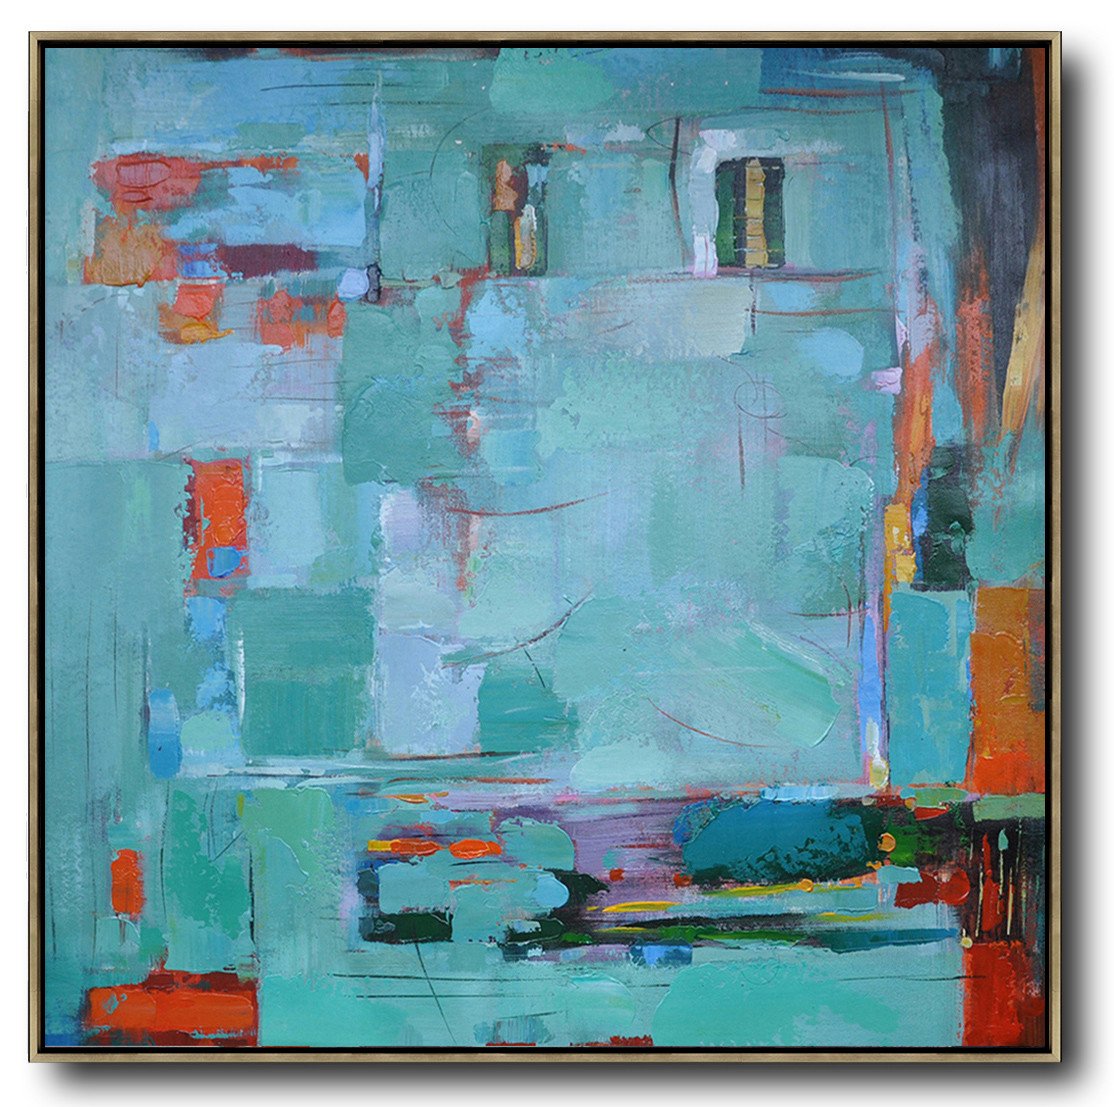 Handmade Painting Large Abstract Art,Oversized Contemporary Art,Modern Painting Abstract,Green,Blue,Red,Orange.etc